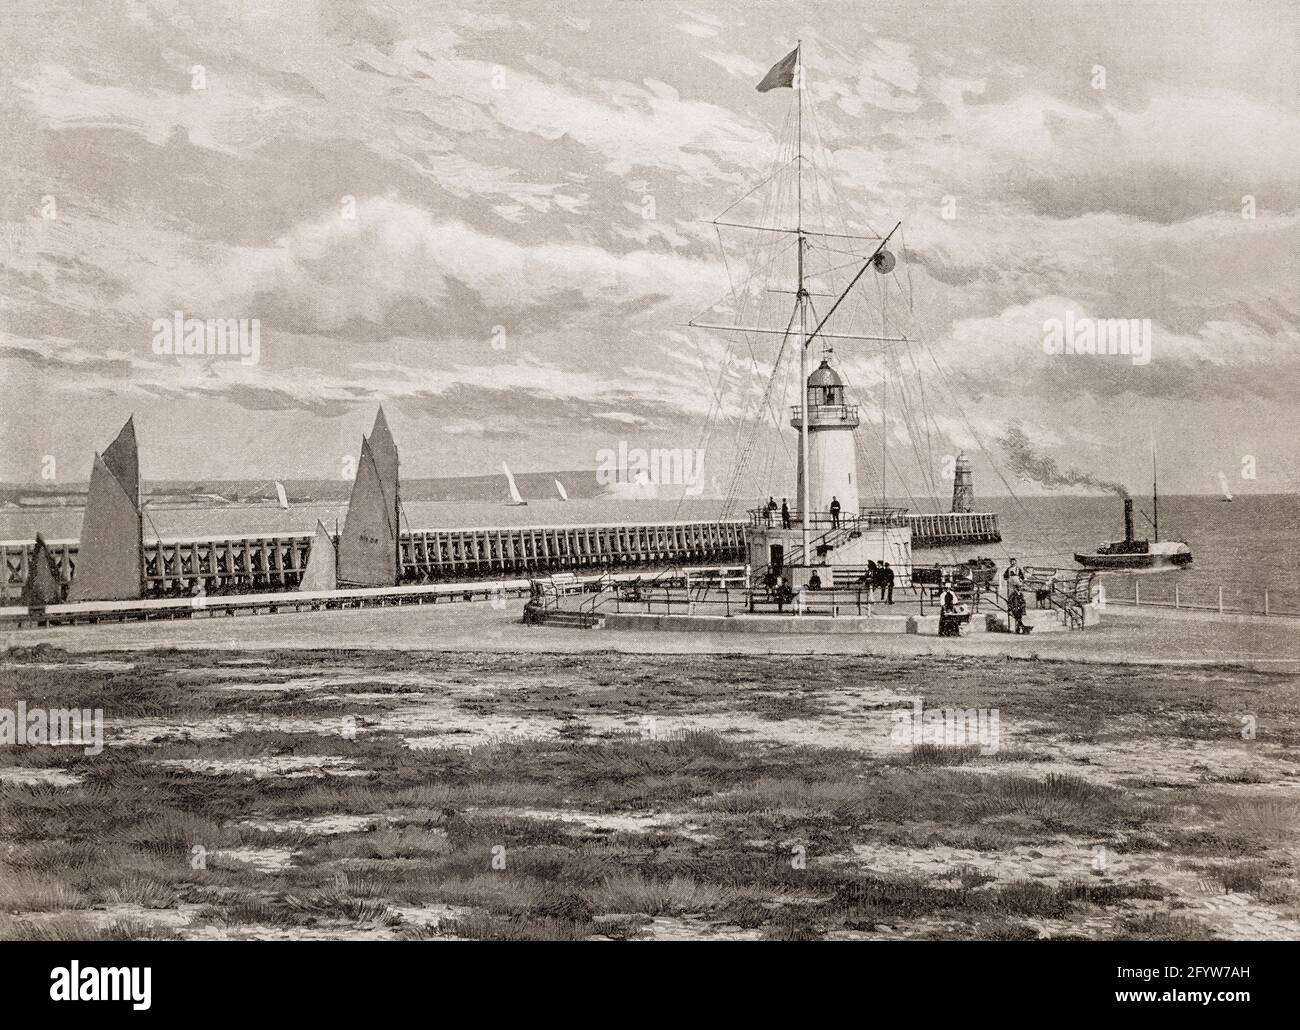 A late 19th century view of the Signal Station  beside the breakwater in Newhaven. Built before the days of Radio telegraphy, it communicated with shipping using flags. A channel ferry port in East Sussex in England, lying at the mouth of the River Ouse, it was officially recognised as 'The Port of Newhaven' in 1882. Stock Photo